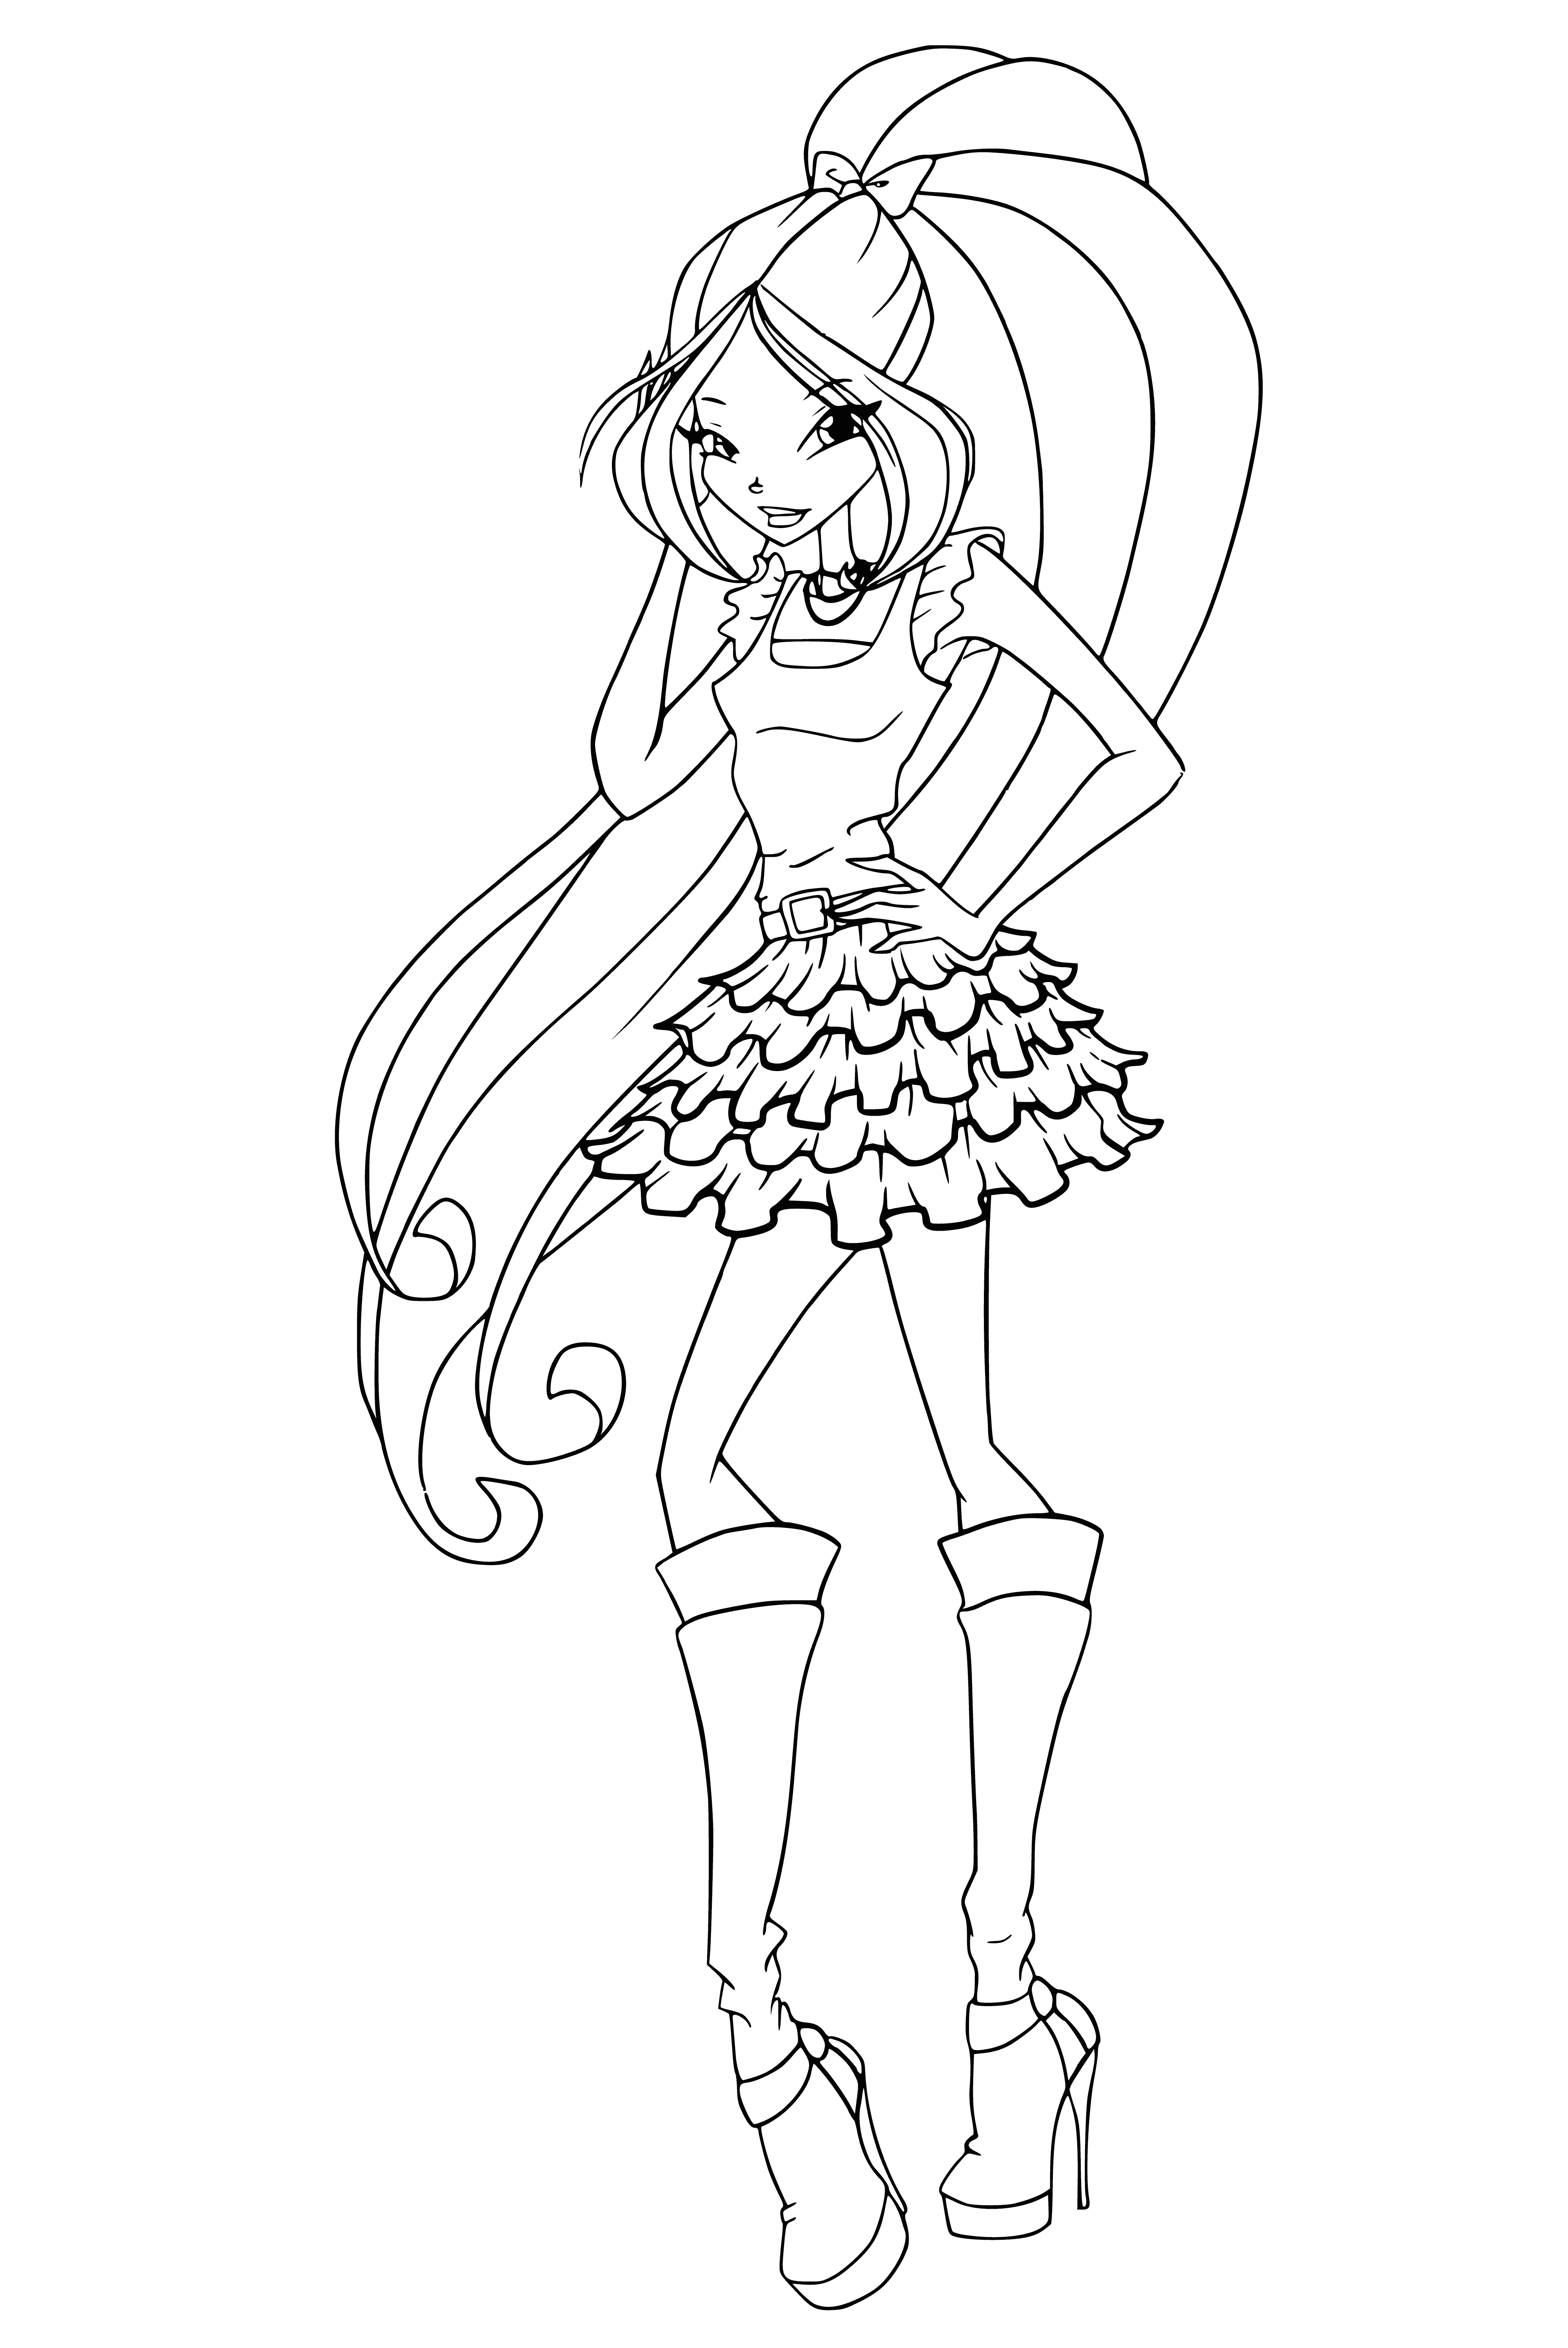 coloring page: Girl in skirt, curly hair, holding a flower; she smiles at the world in her sweet innocence. #beauty